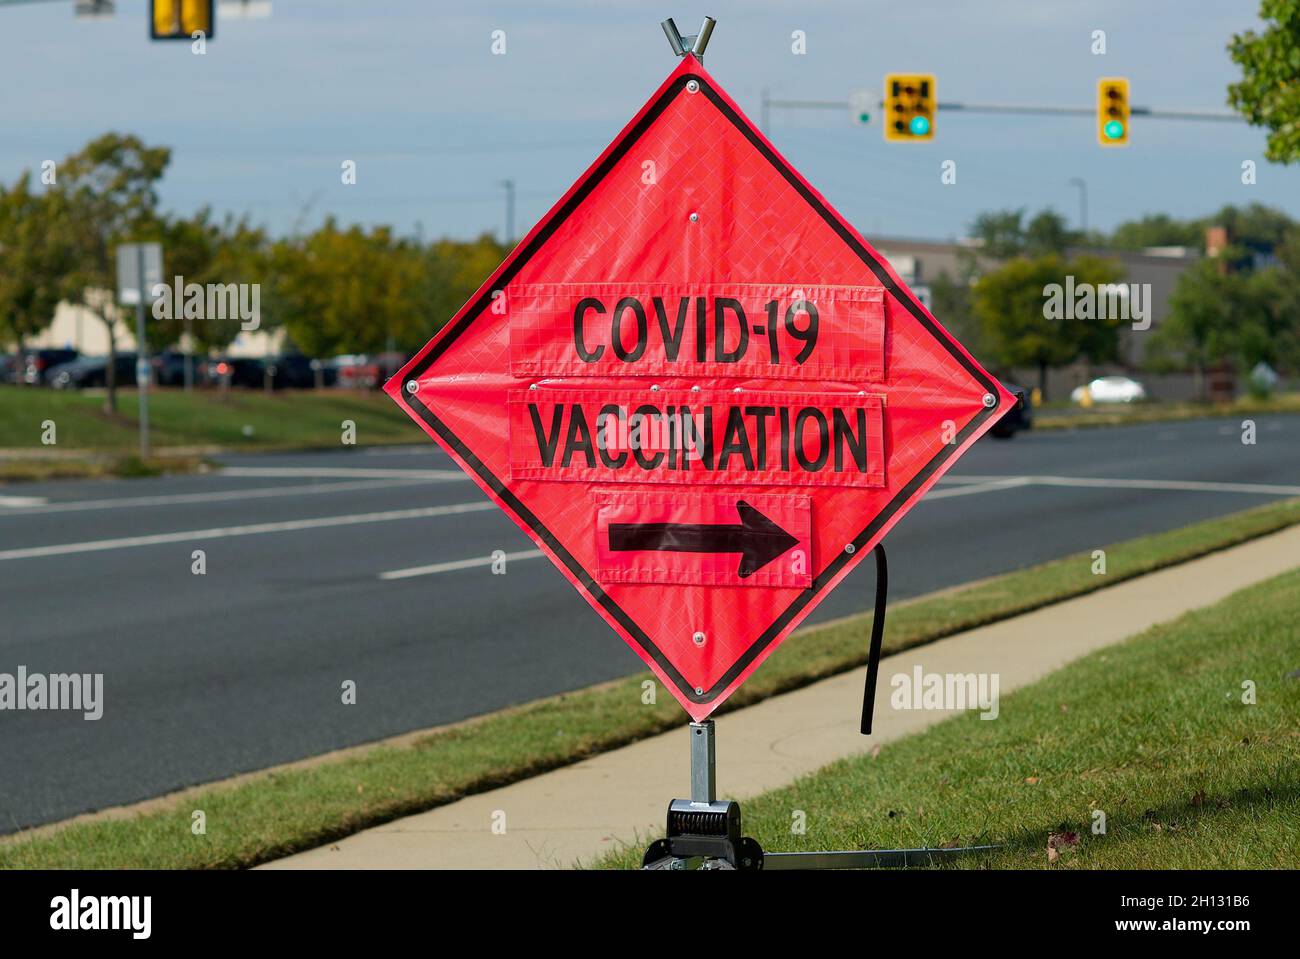 Woodbridge, Virginia, USA - October 15, 2021: A bright orange 'construction' sign shows drivers the entrance to a public COVID-19 vaccination site. Stock Photo